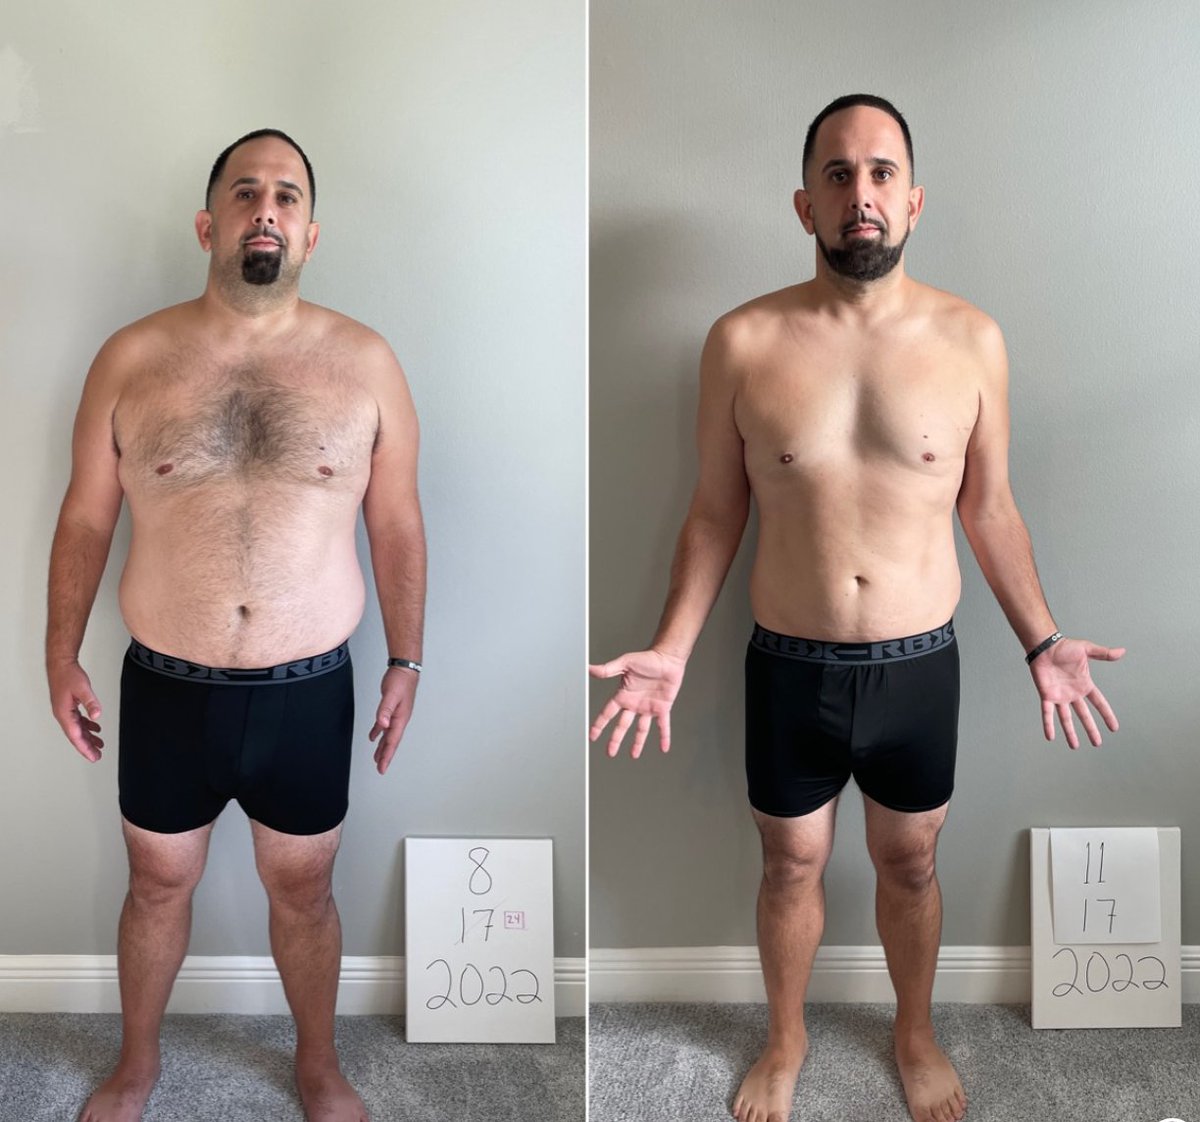 This is my brother.

2 years ago, he struggled with:

• Obesity
• Chest pains
• Sleep apnea

My mom thought she was going to lose him.

So I moved to his city & helped him drop 52lbs in 90 days.

Now he’s healthier than ever.

Here's the fitness plan I used to save his life: